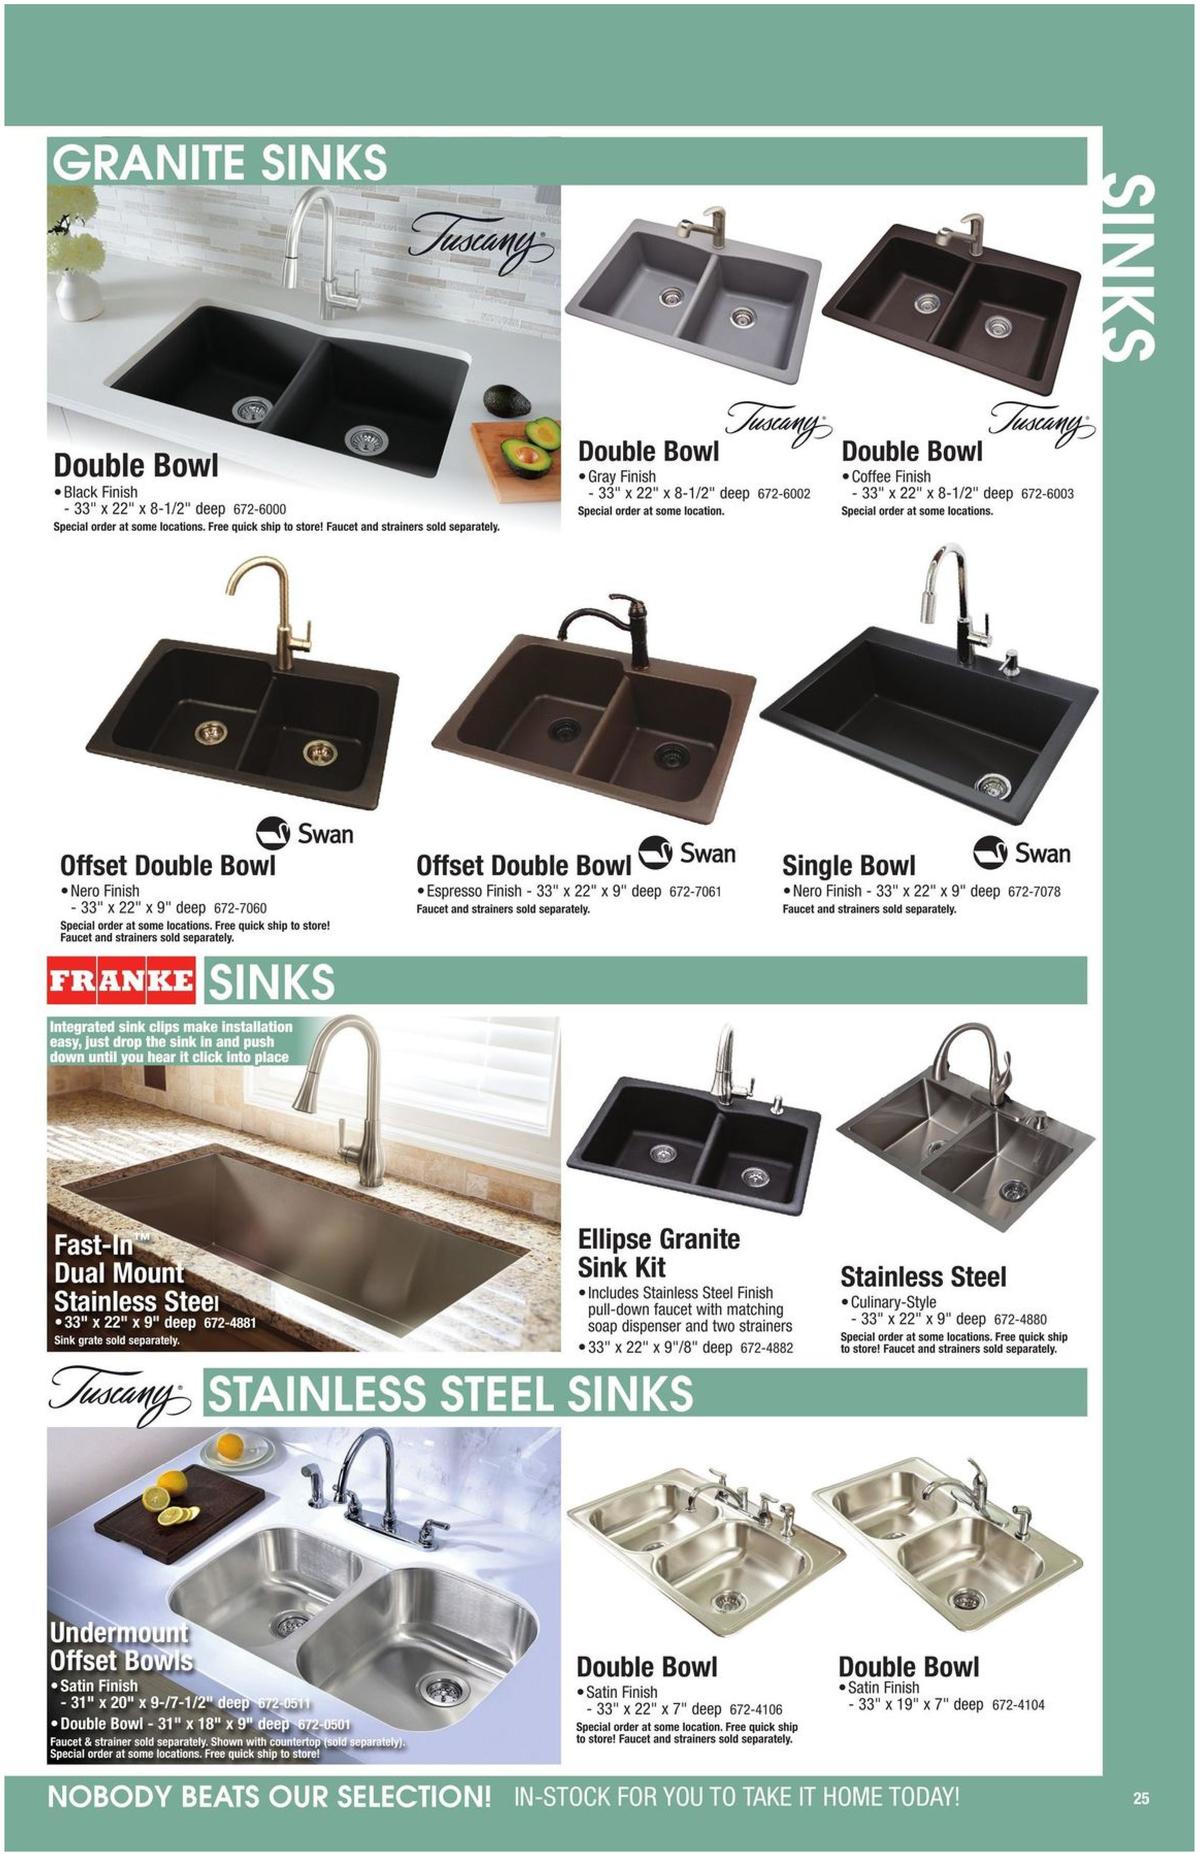 Menards Kitchen & Appliance Catalog Weekly Ad from August 25